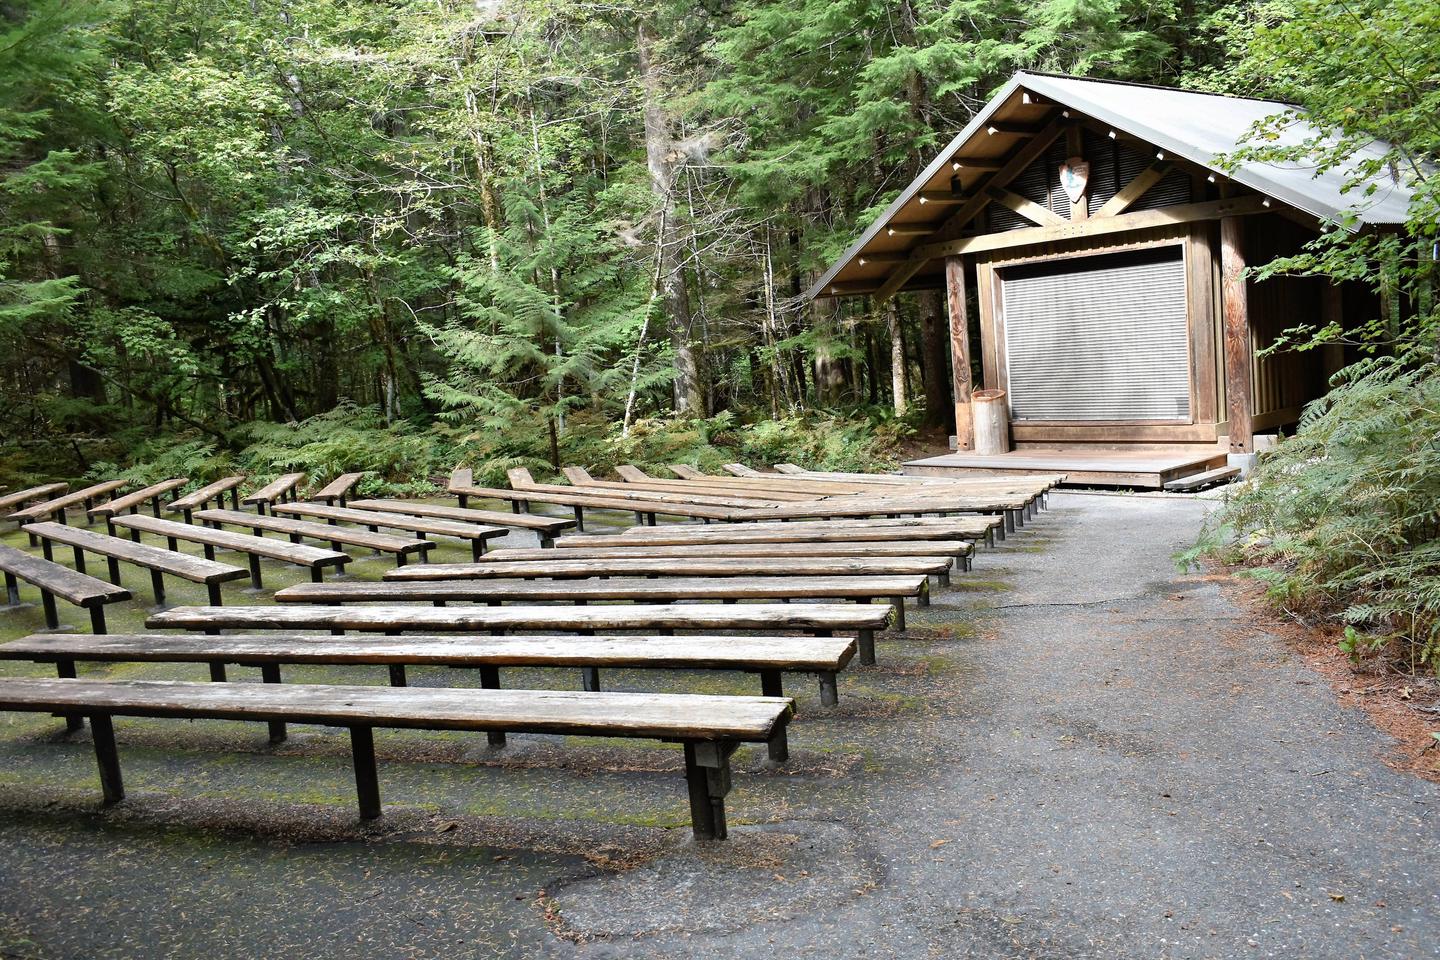 Rustic amphitheater in campgroundAmphitheater located in the campground for Ranger programs